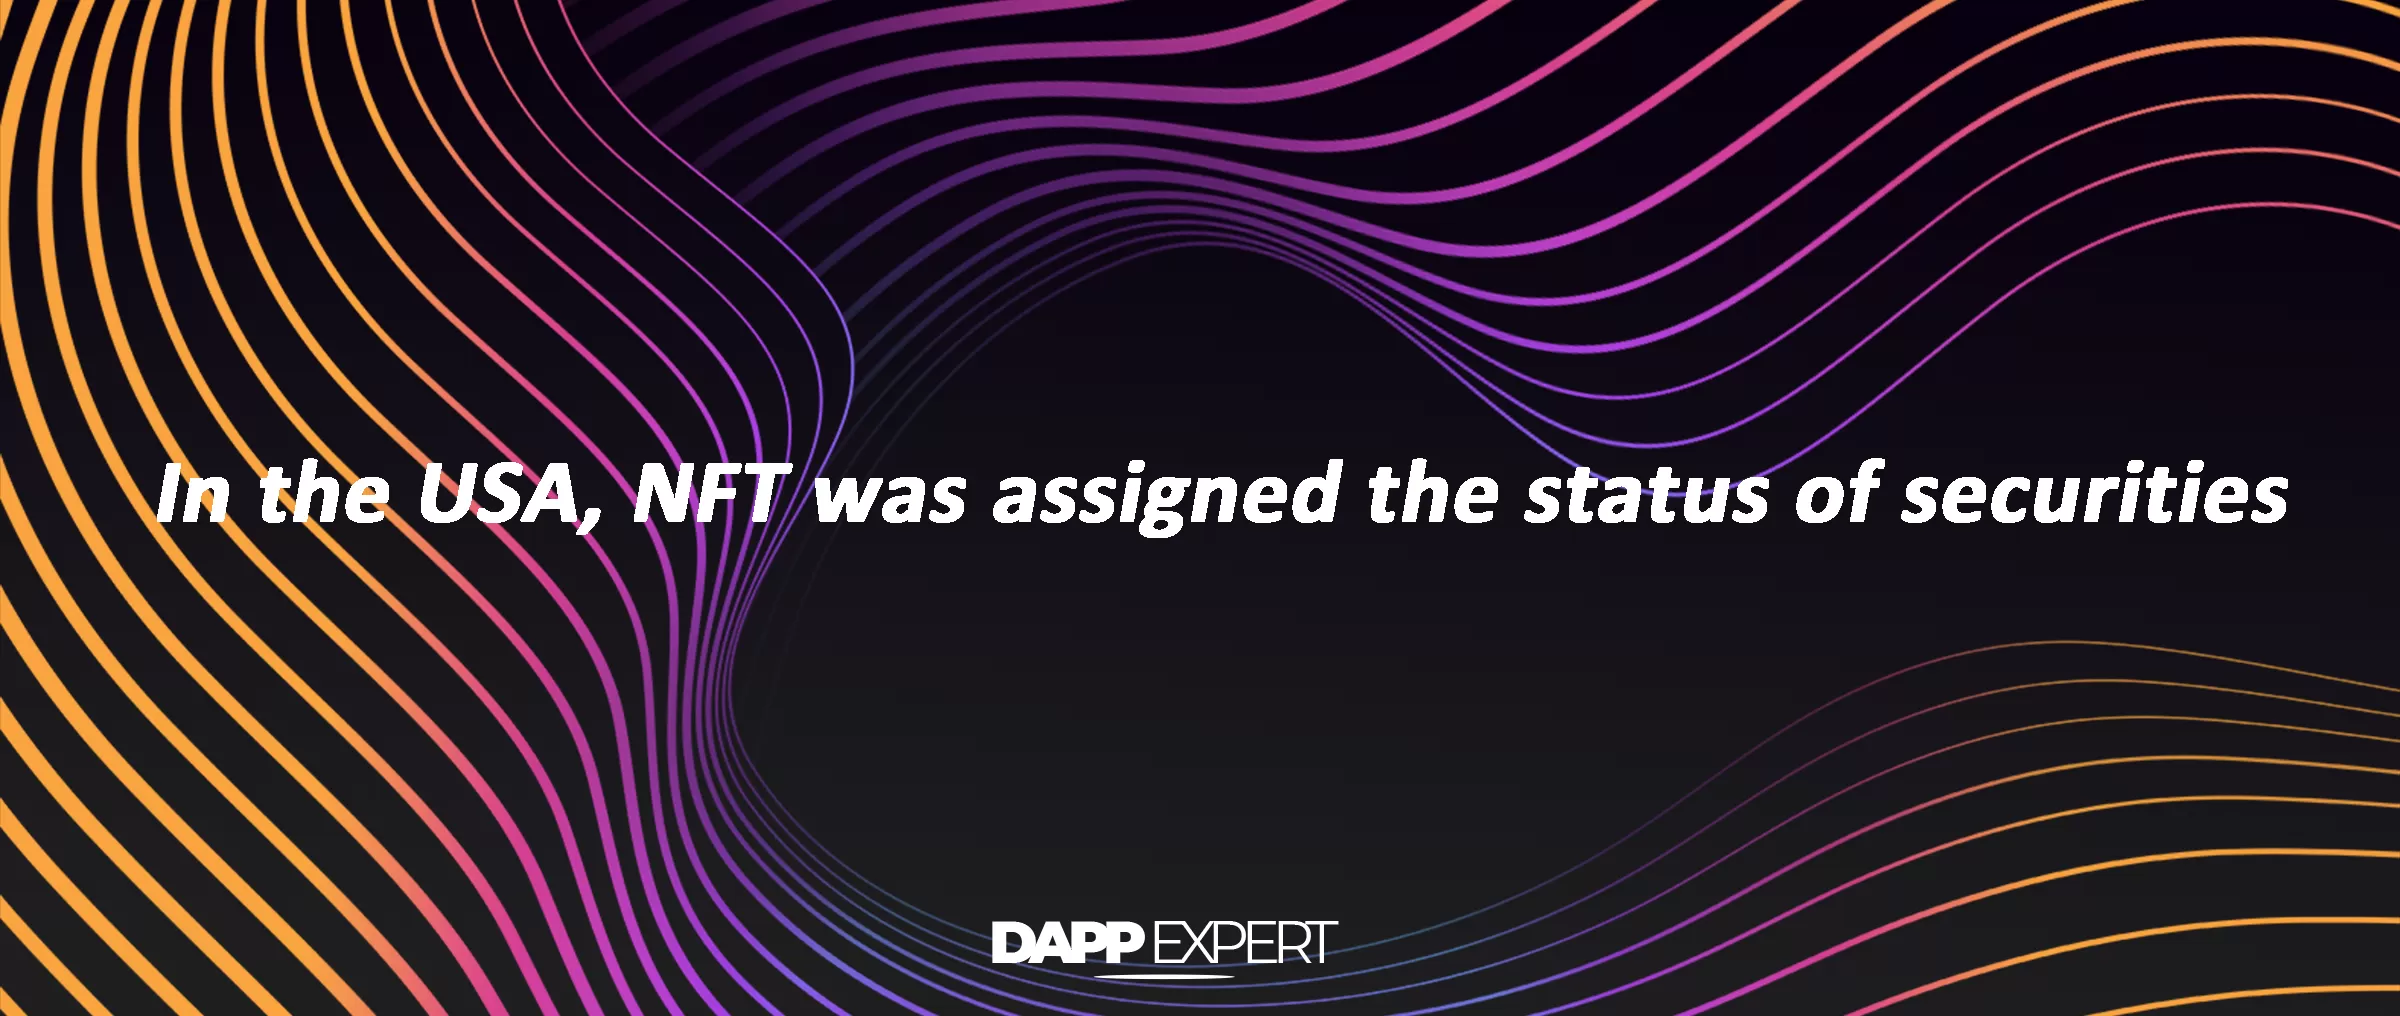 In the USA, NFT was assigned the status of securities